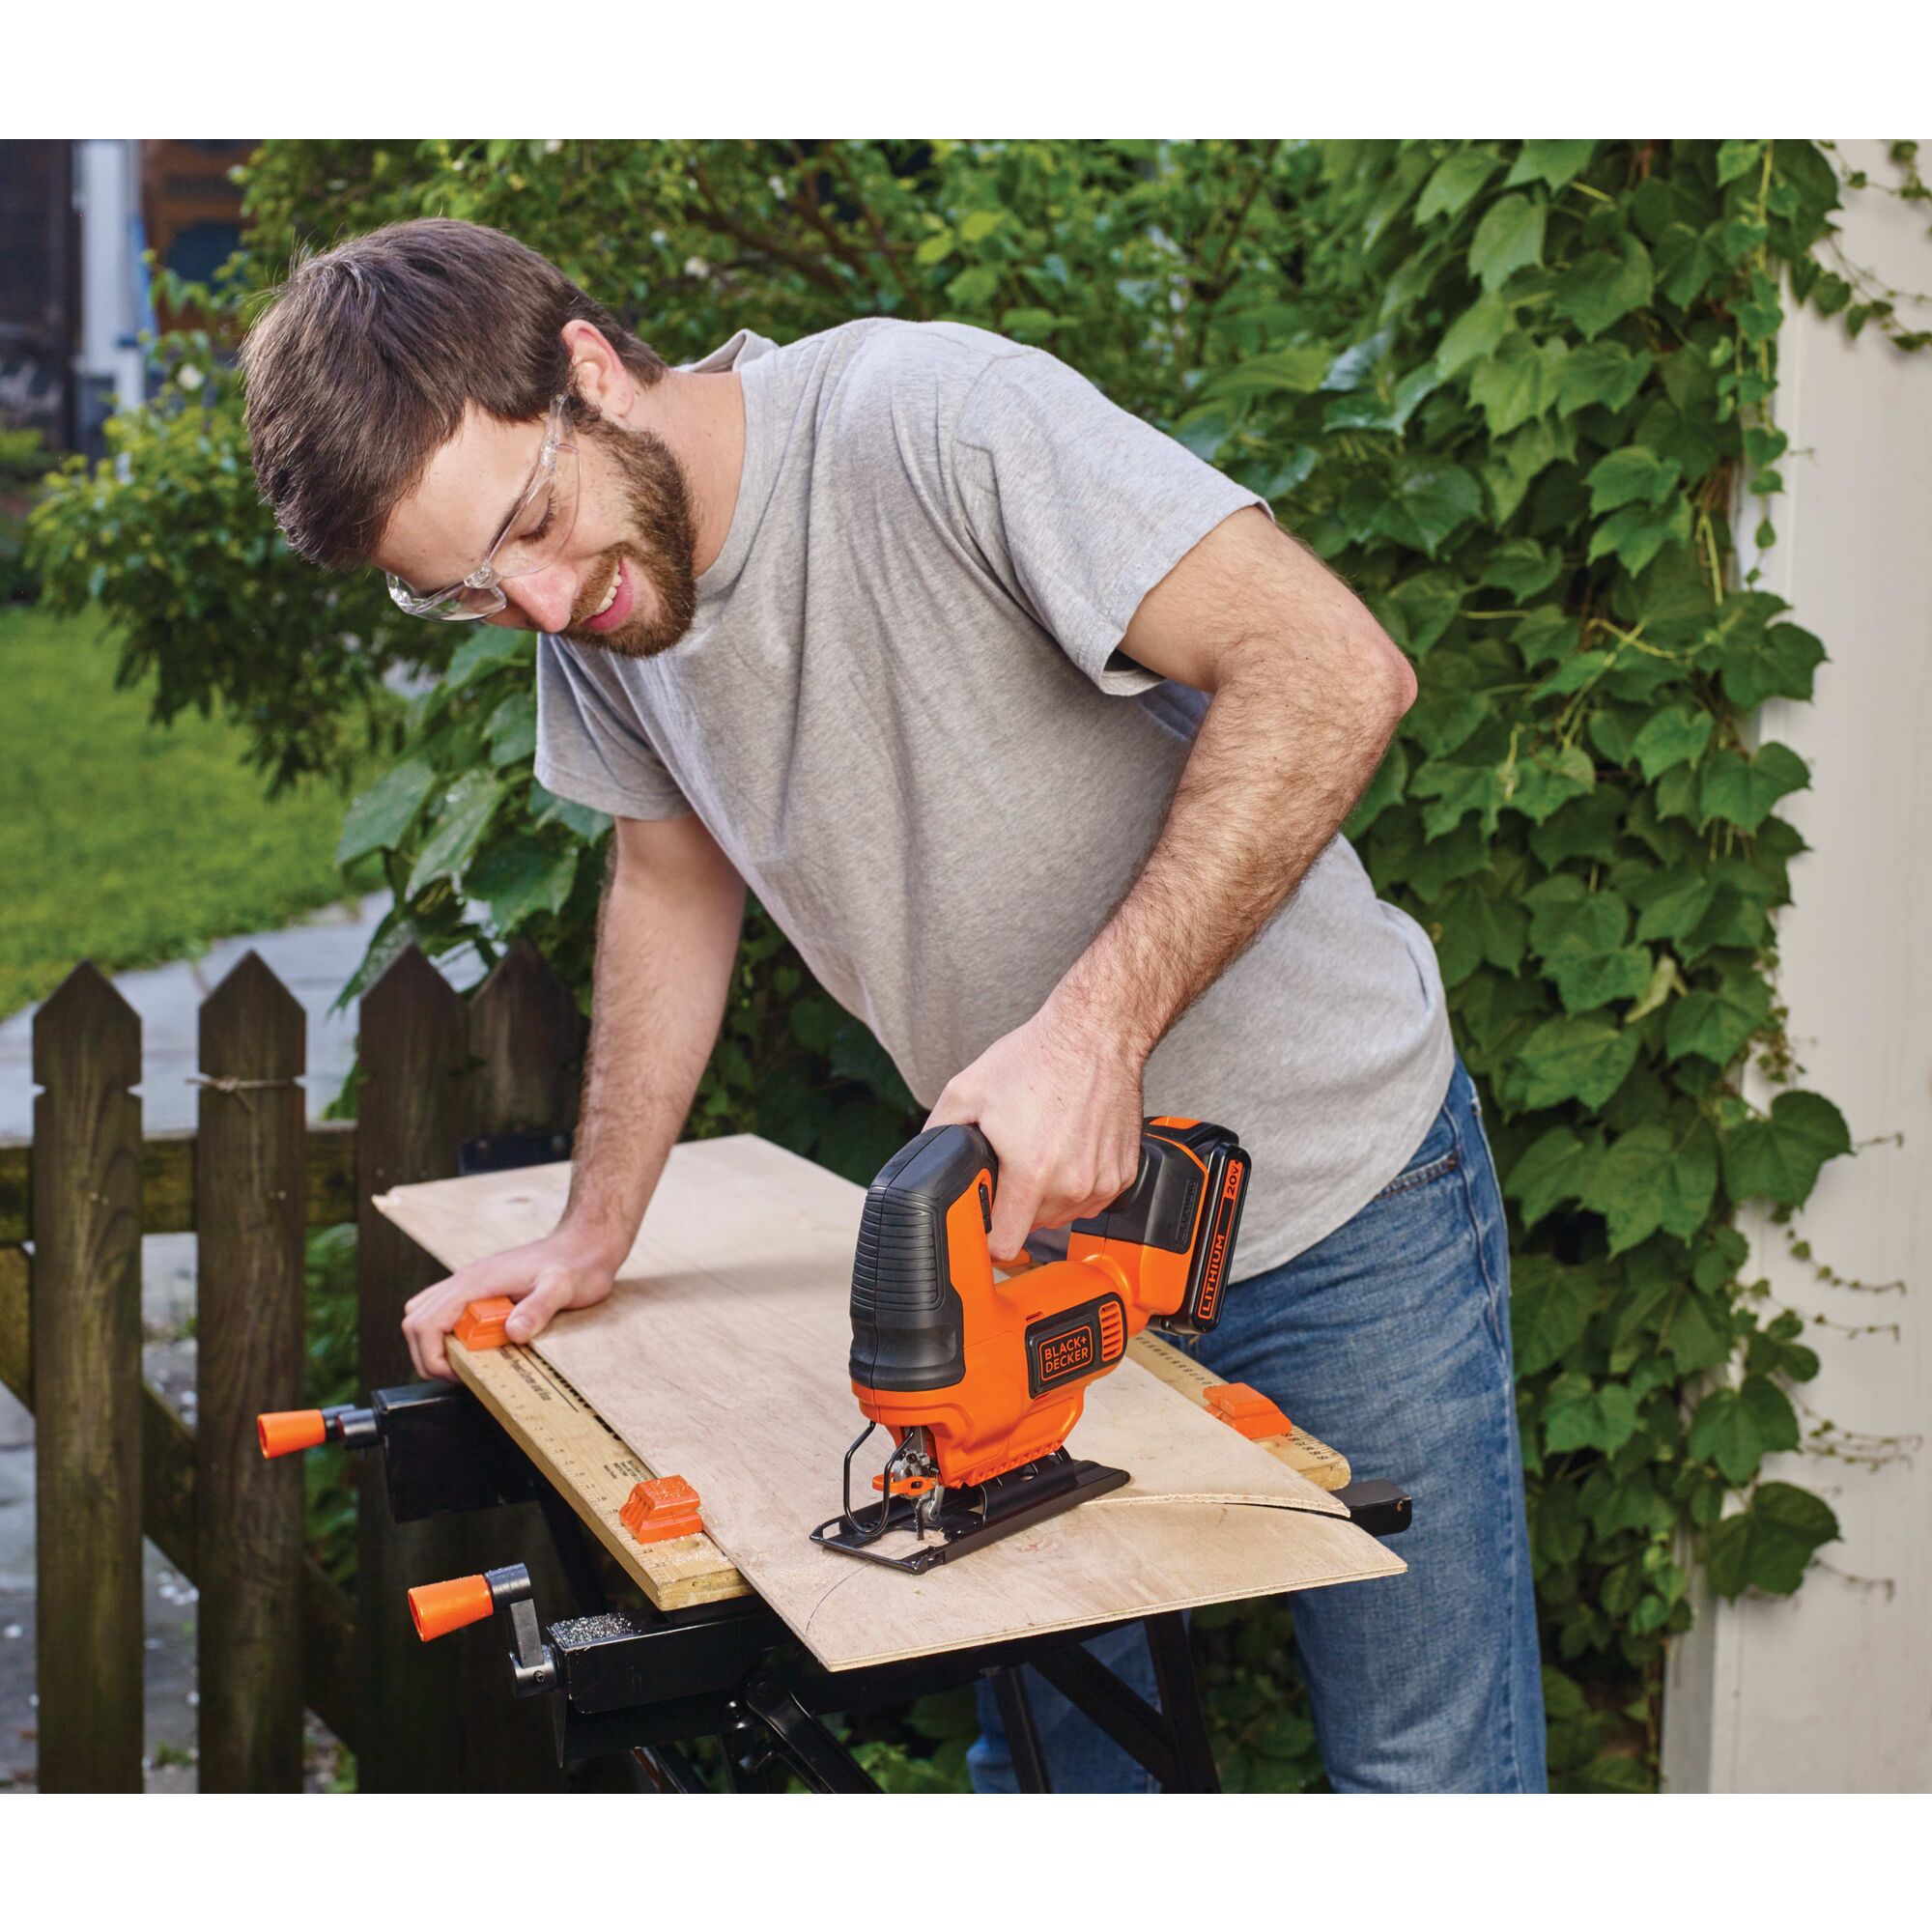 20 volt MAX cordless jigsaw being used by a person to cut wood outdoors.